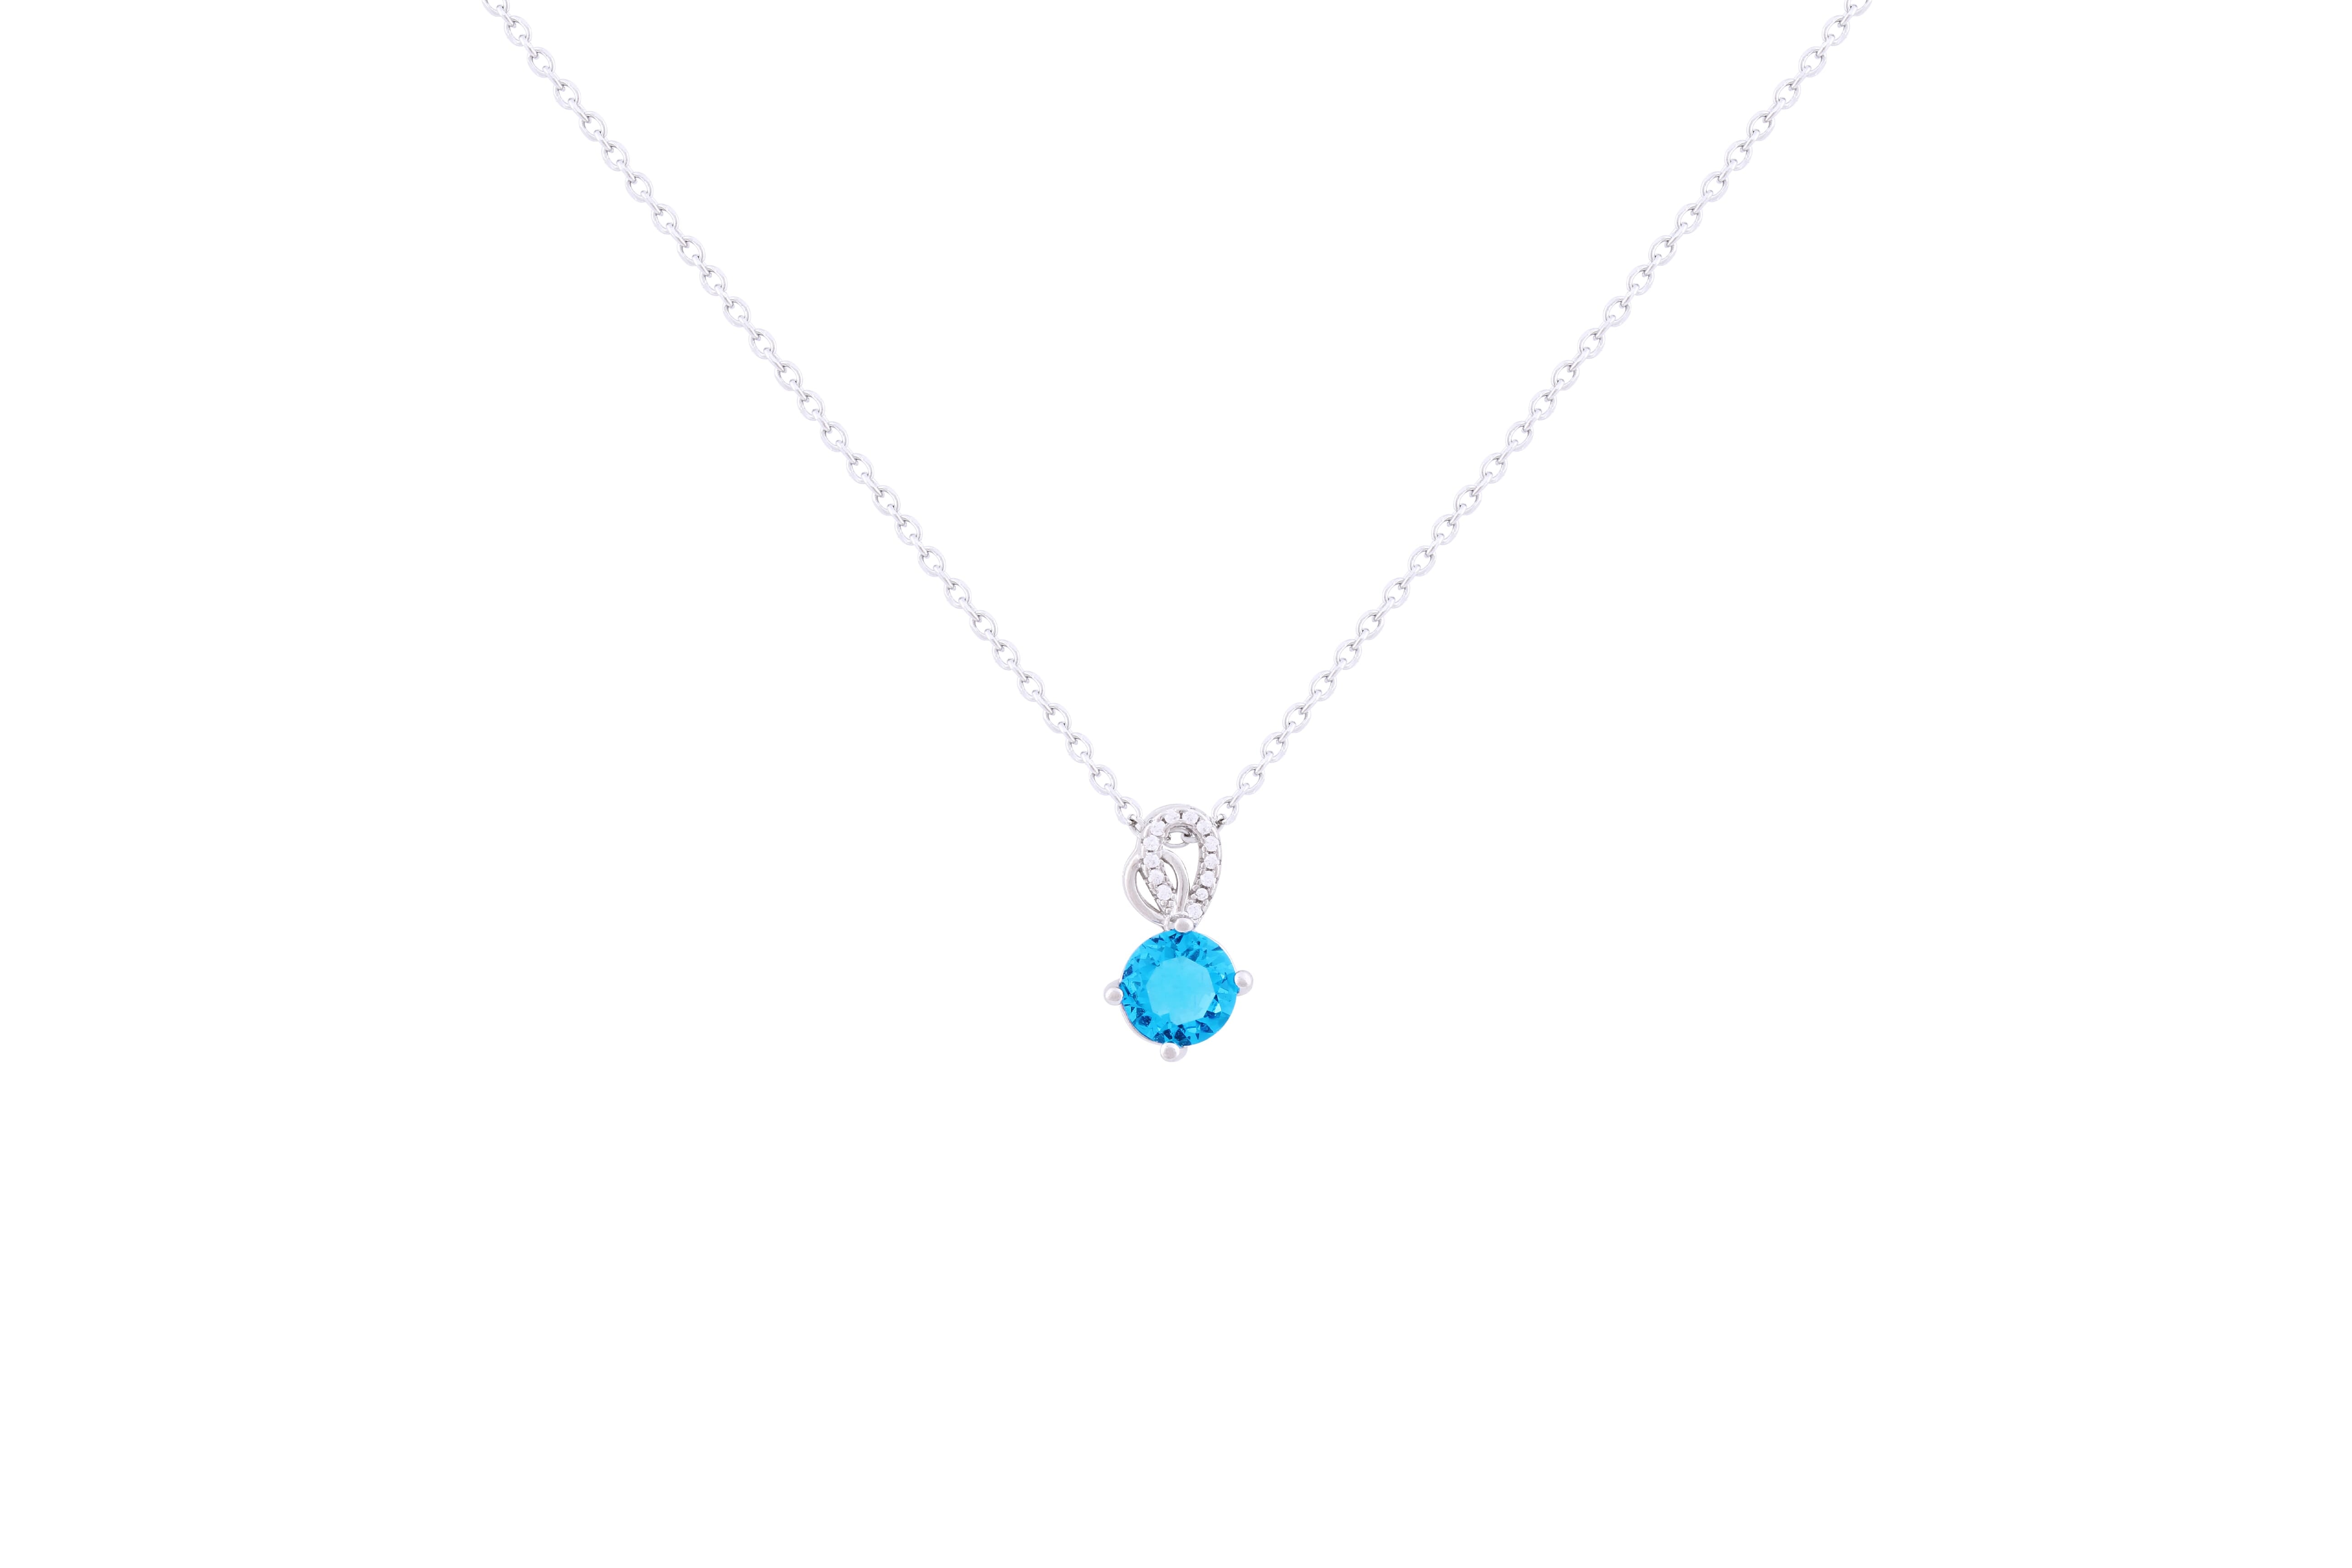 Asfour 925 Sterling Silver Necklace Inlaid With Round Aquamarine Zircon Stone NR0500-M